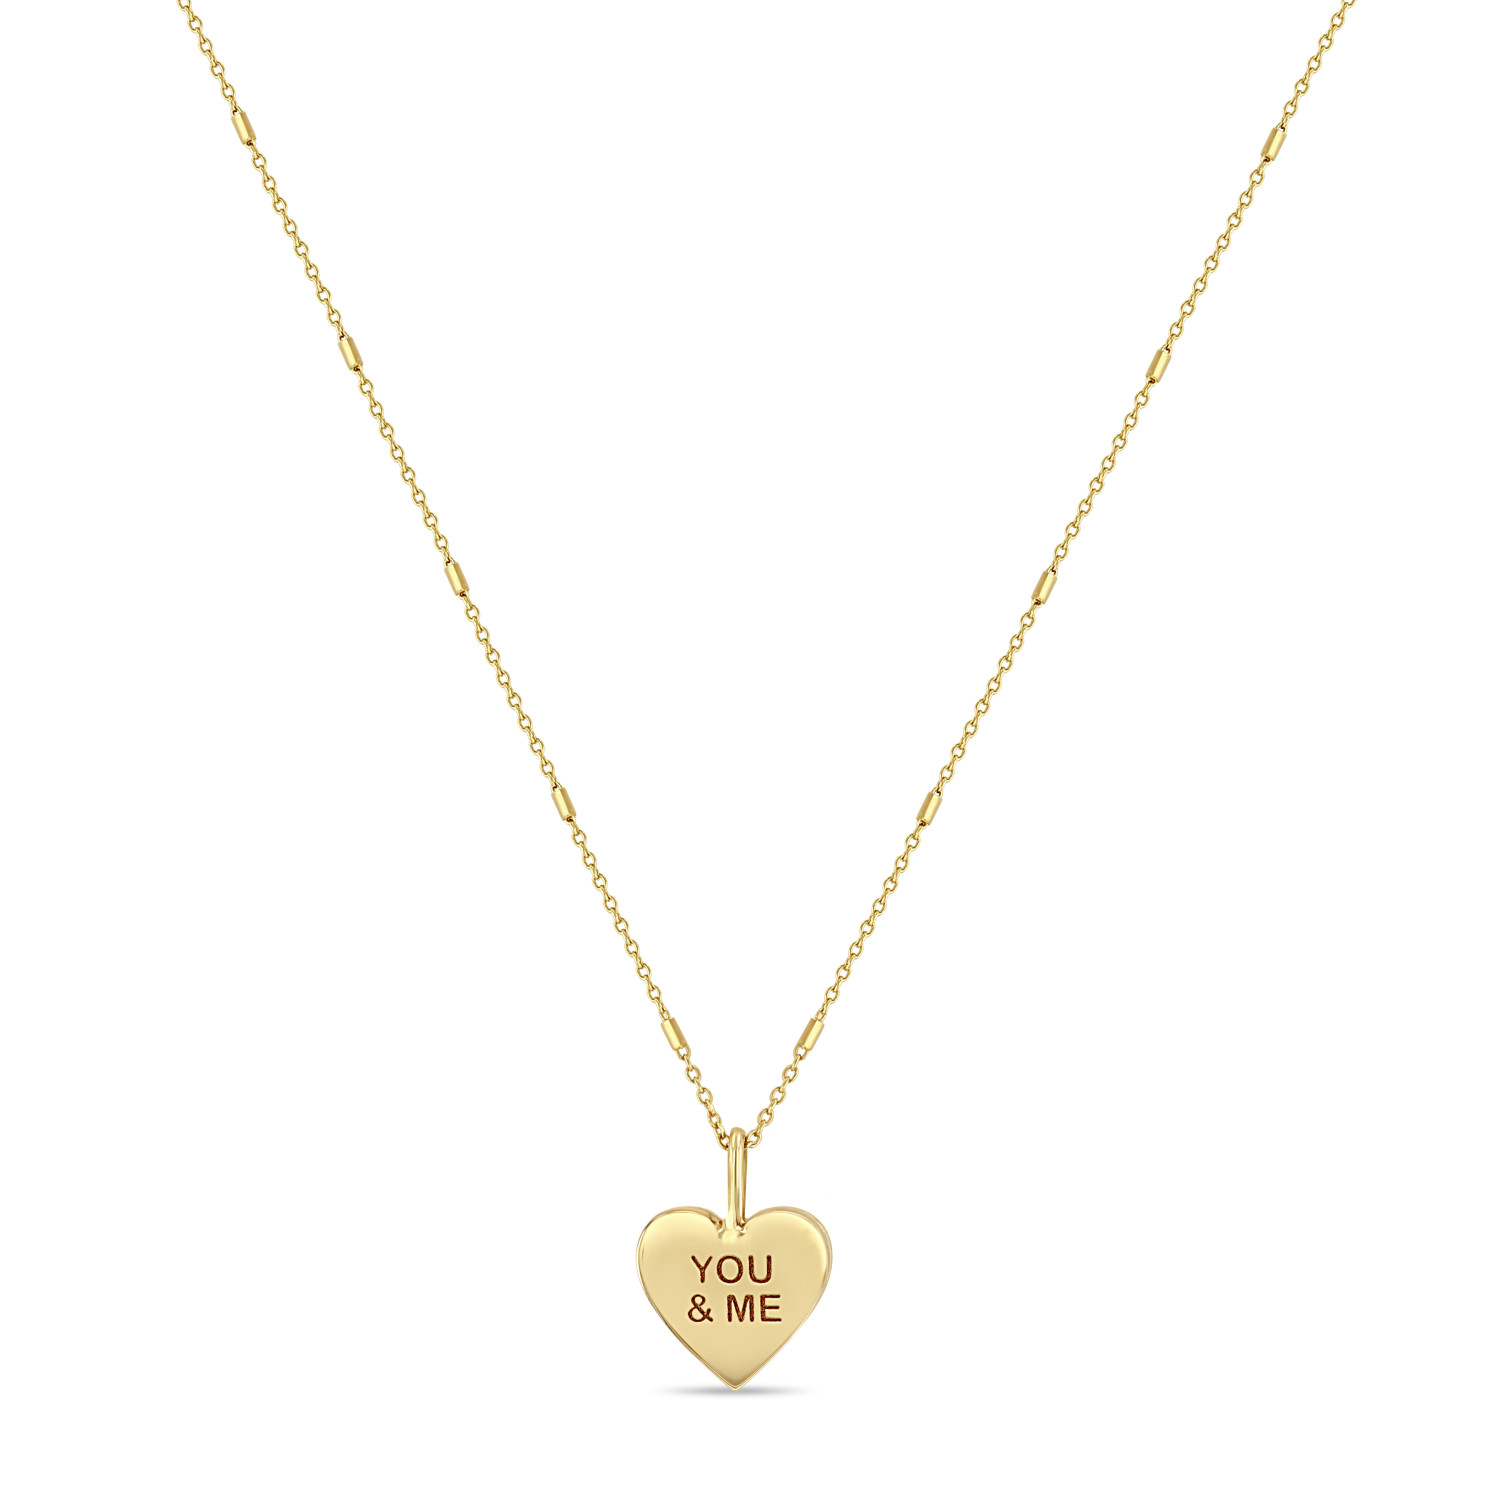 “YOU & ME” Heart Pendant Necklace in 14K Yellow Gold